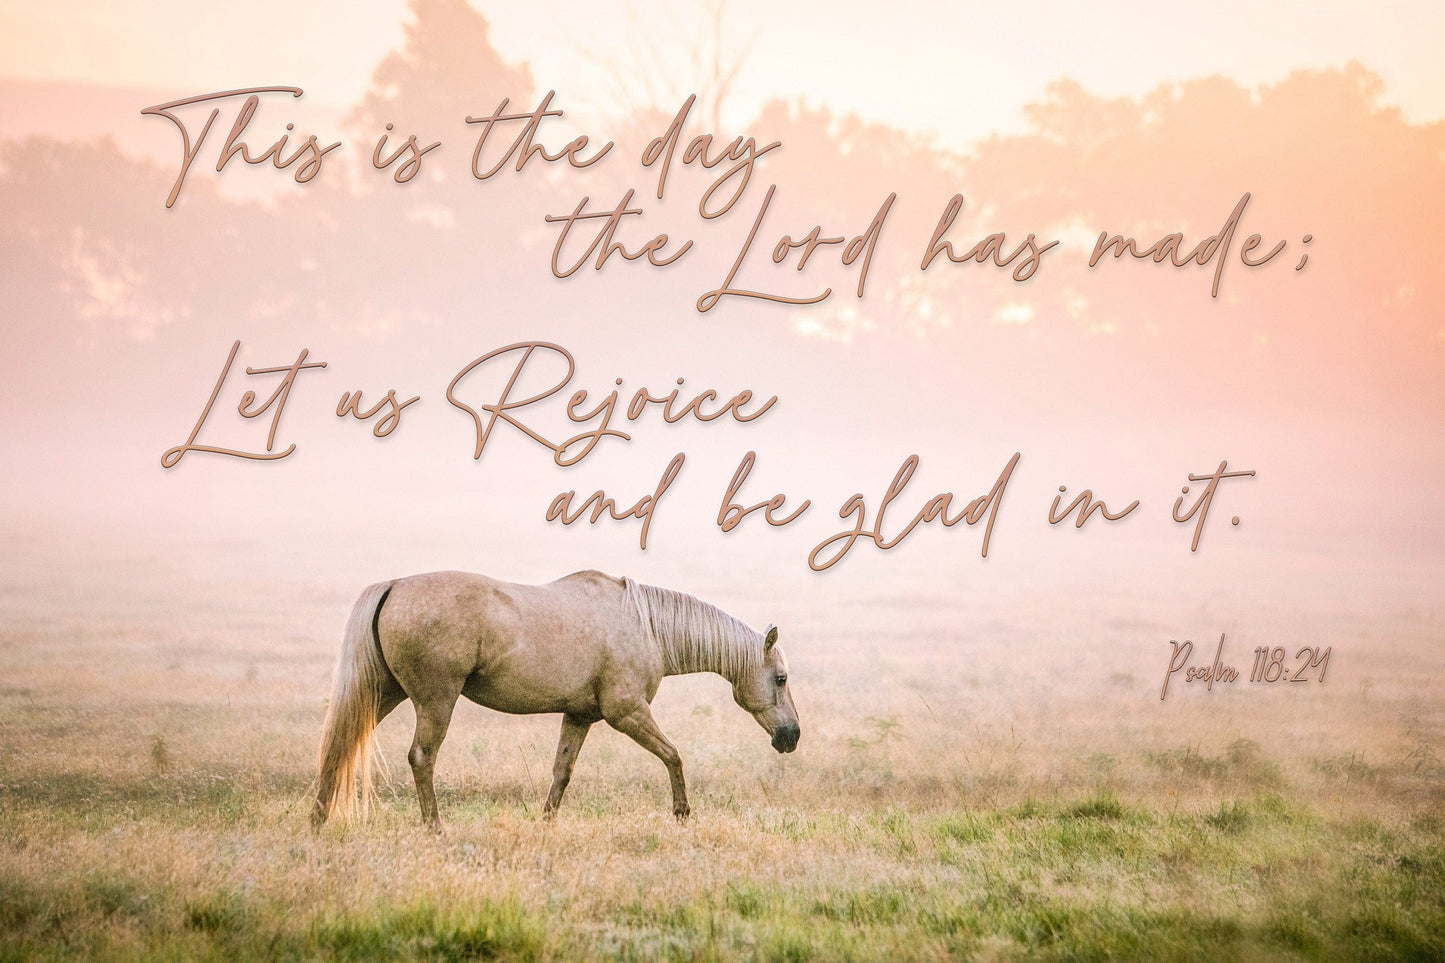 Teri James Photography Wall Art Paper Photo Print / 12 x 18 Inches Horse Art - This is the Day the Lord has Made